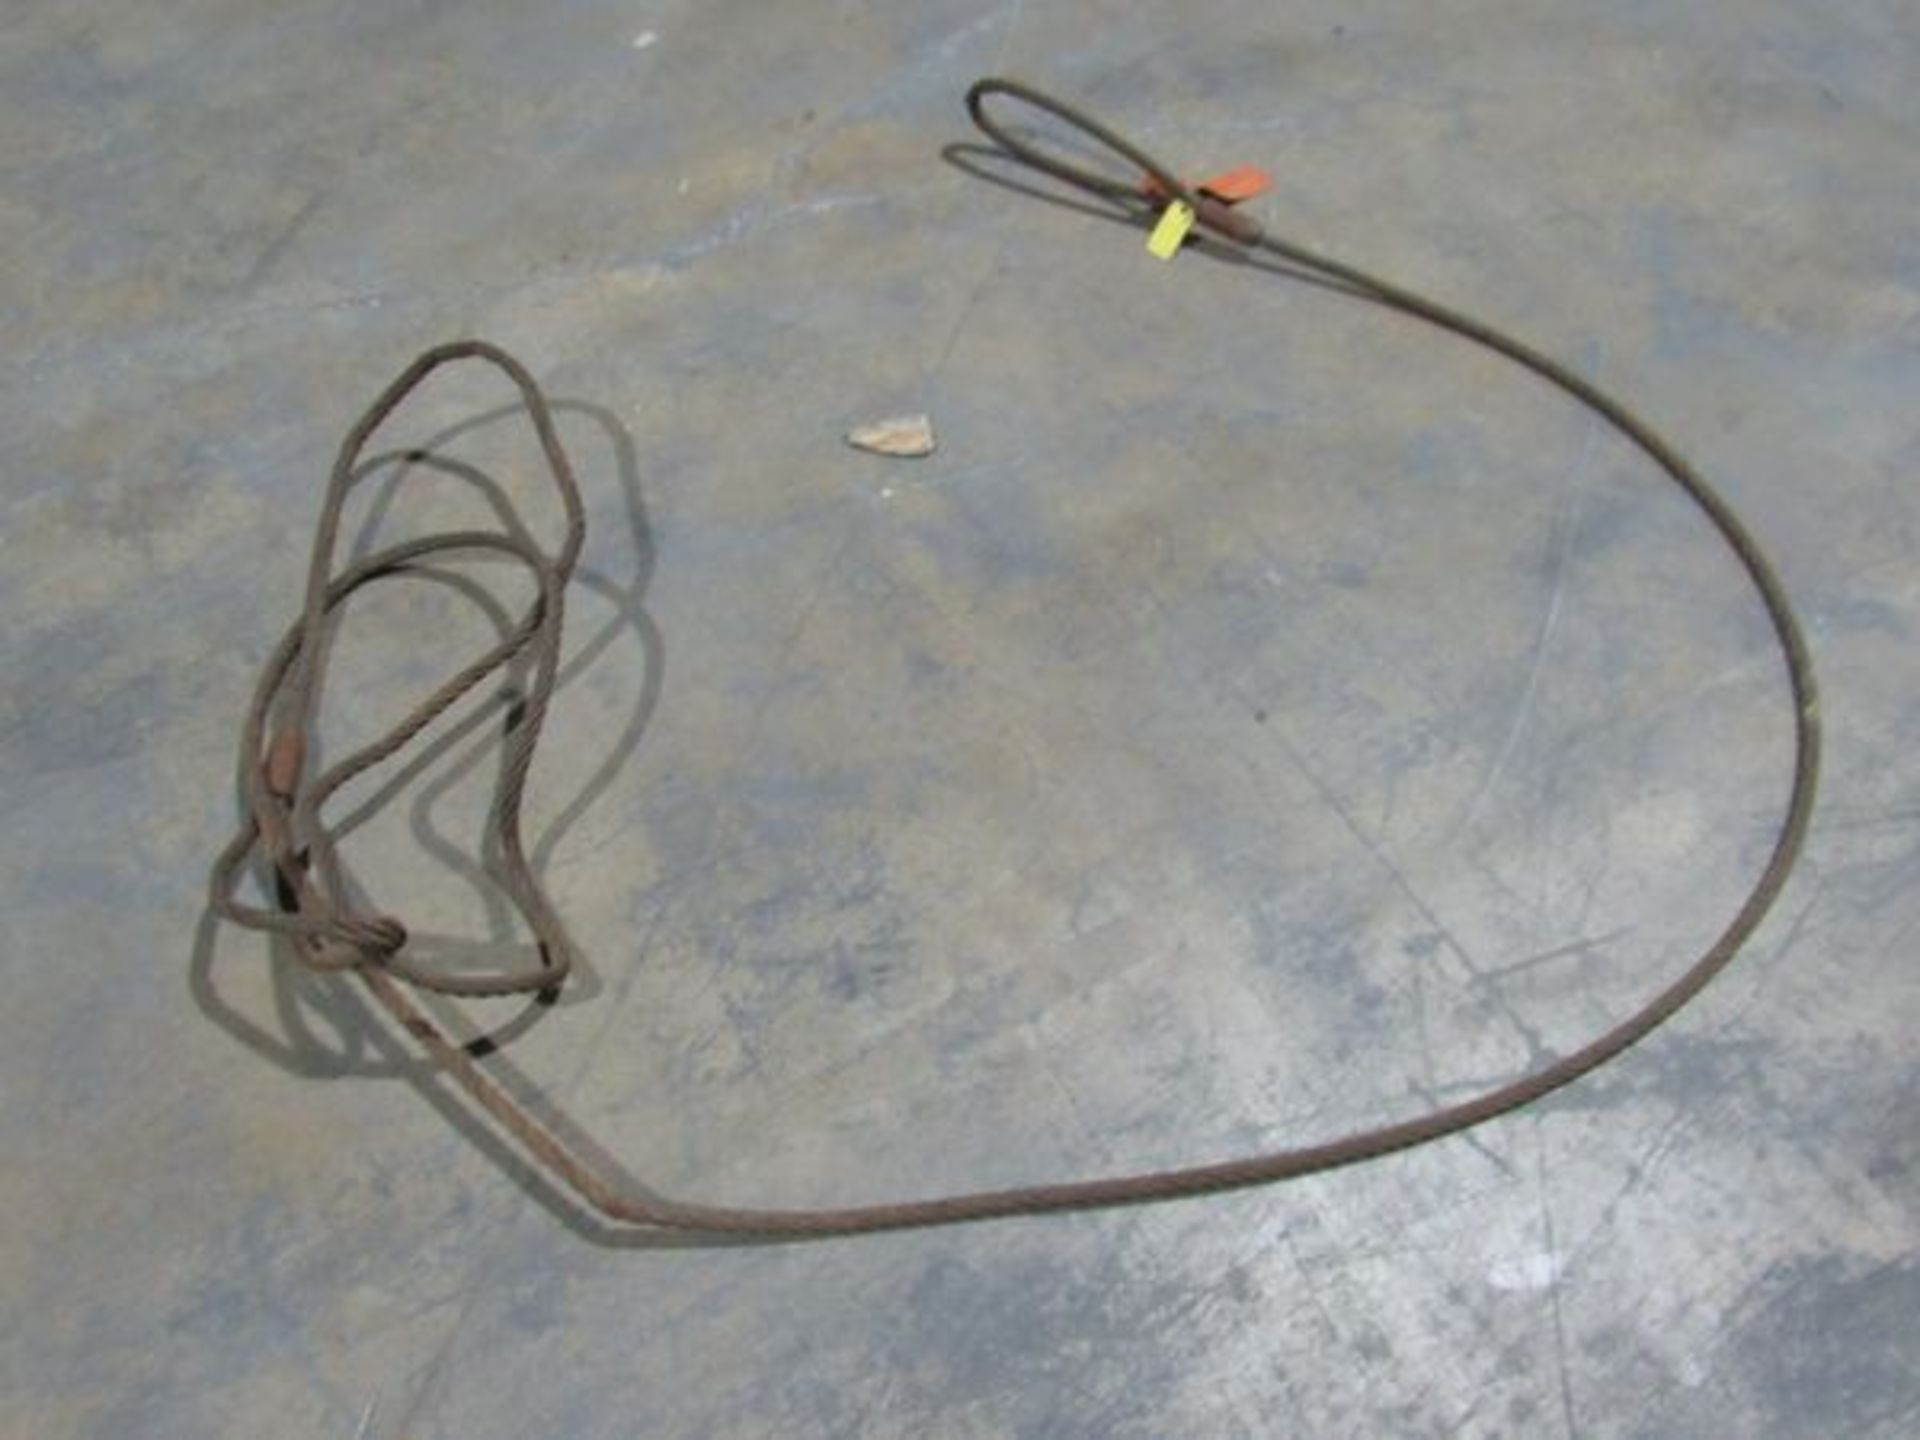 Assorted Braided Steel Lifting Slings- MFR - Total Tool, Lindi Sling Sizes Range From 3/8" to 1" - Image 15 of 20